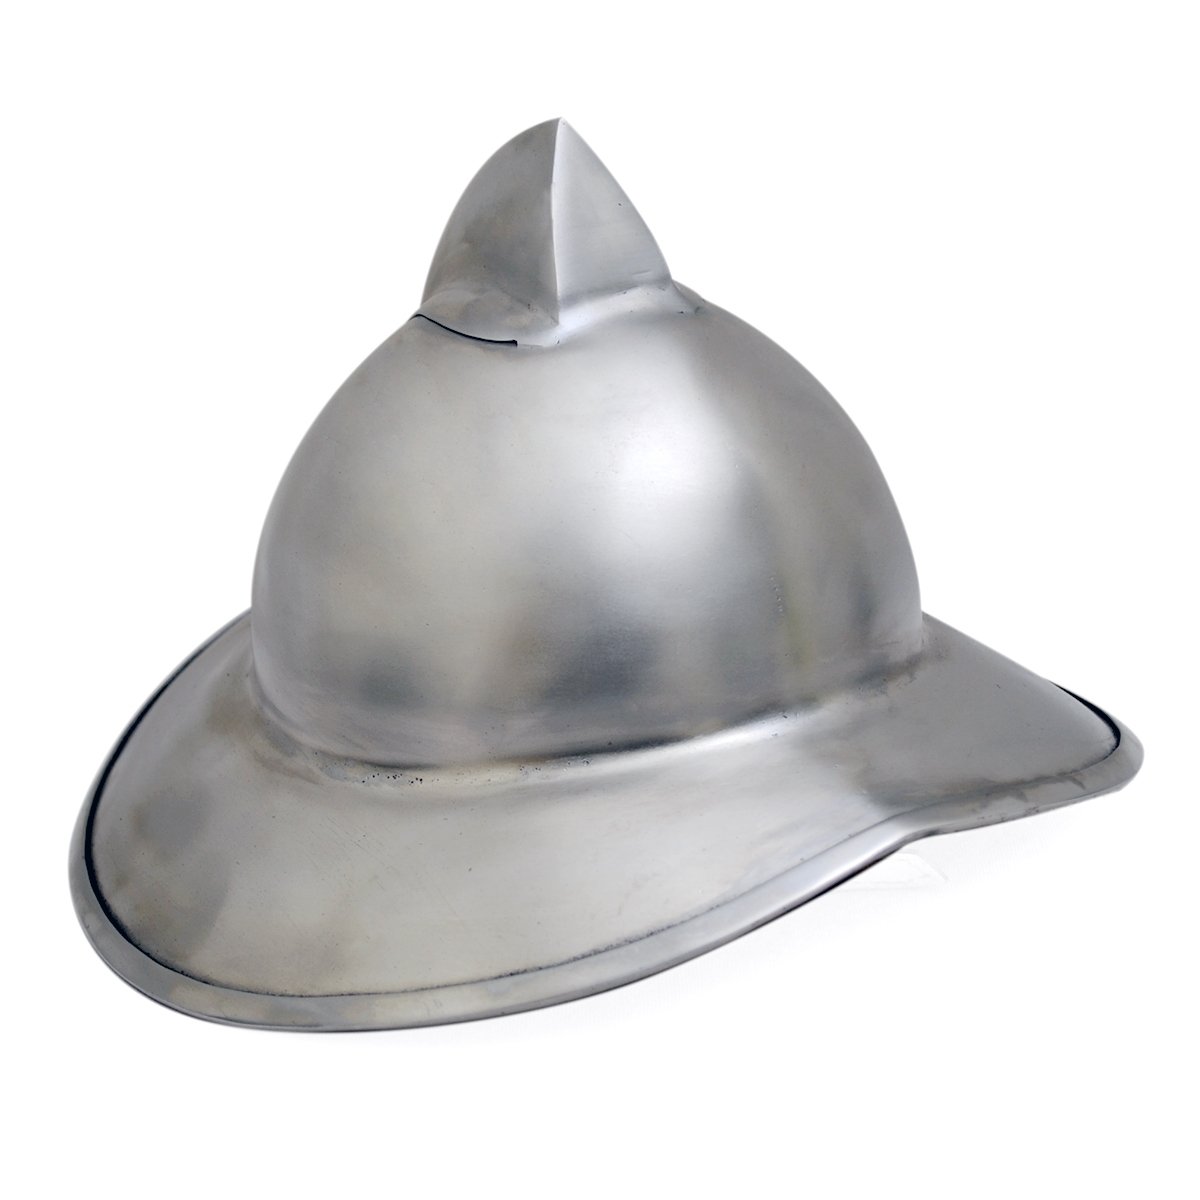 Early Kettle Hat from maciejowski Bible - C. 1250, Size XL